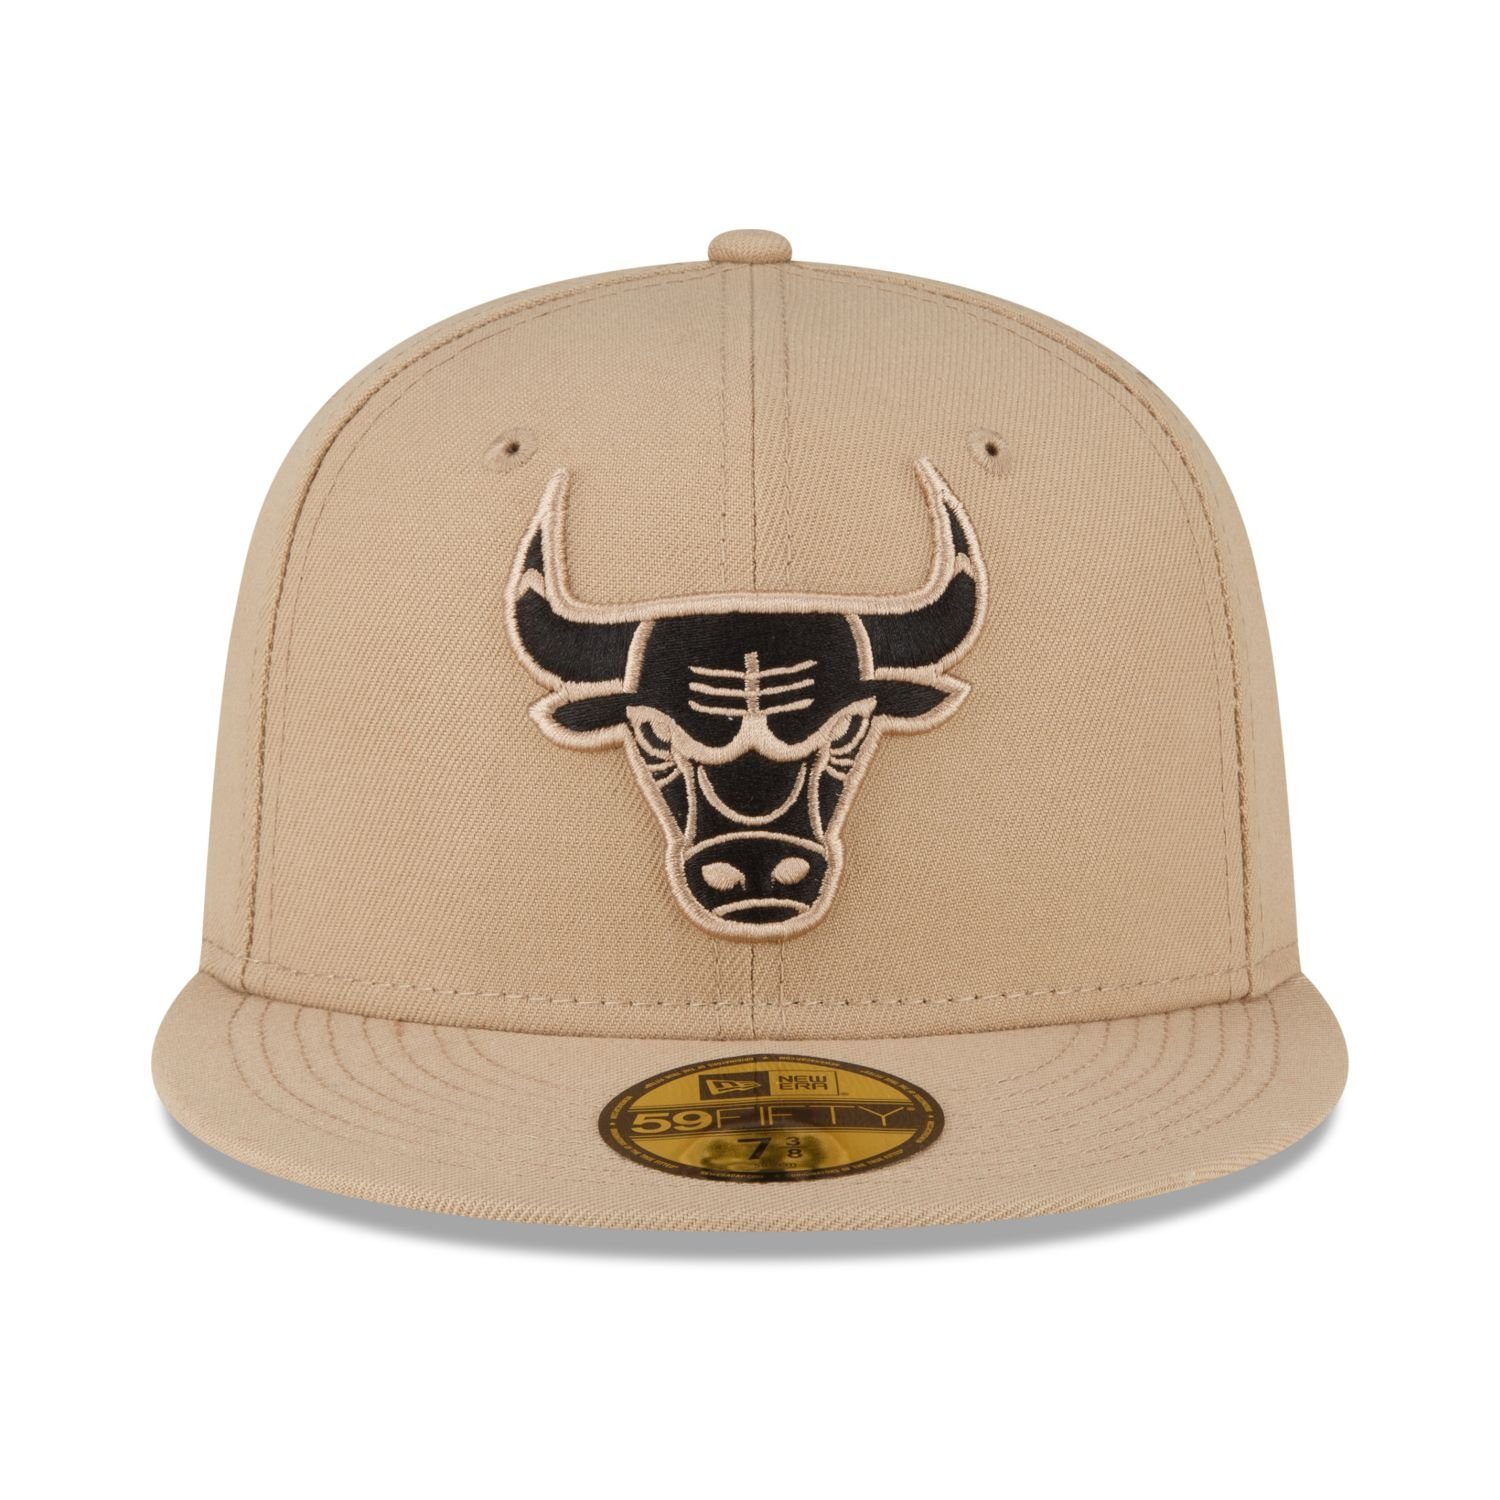 Fitted Chicago Bulls Era New Cap 59Fifty NBA